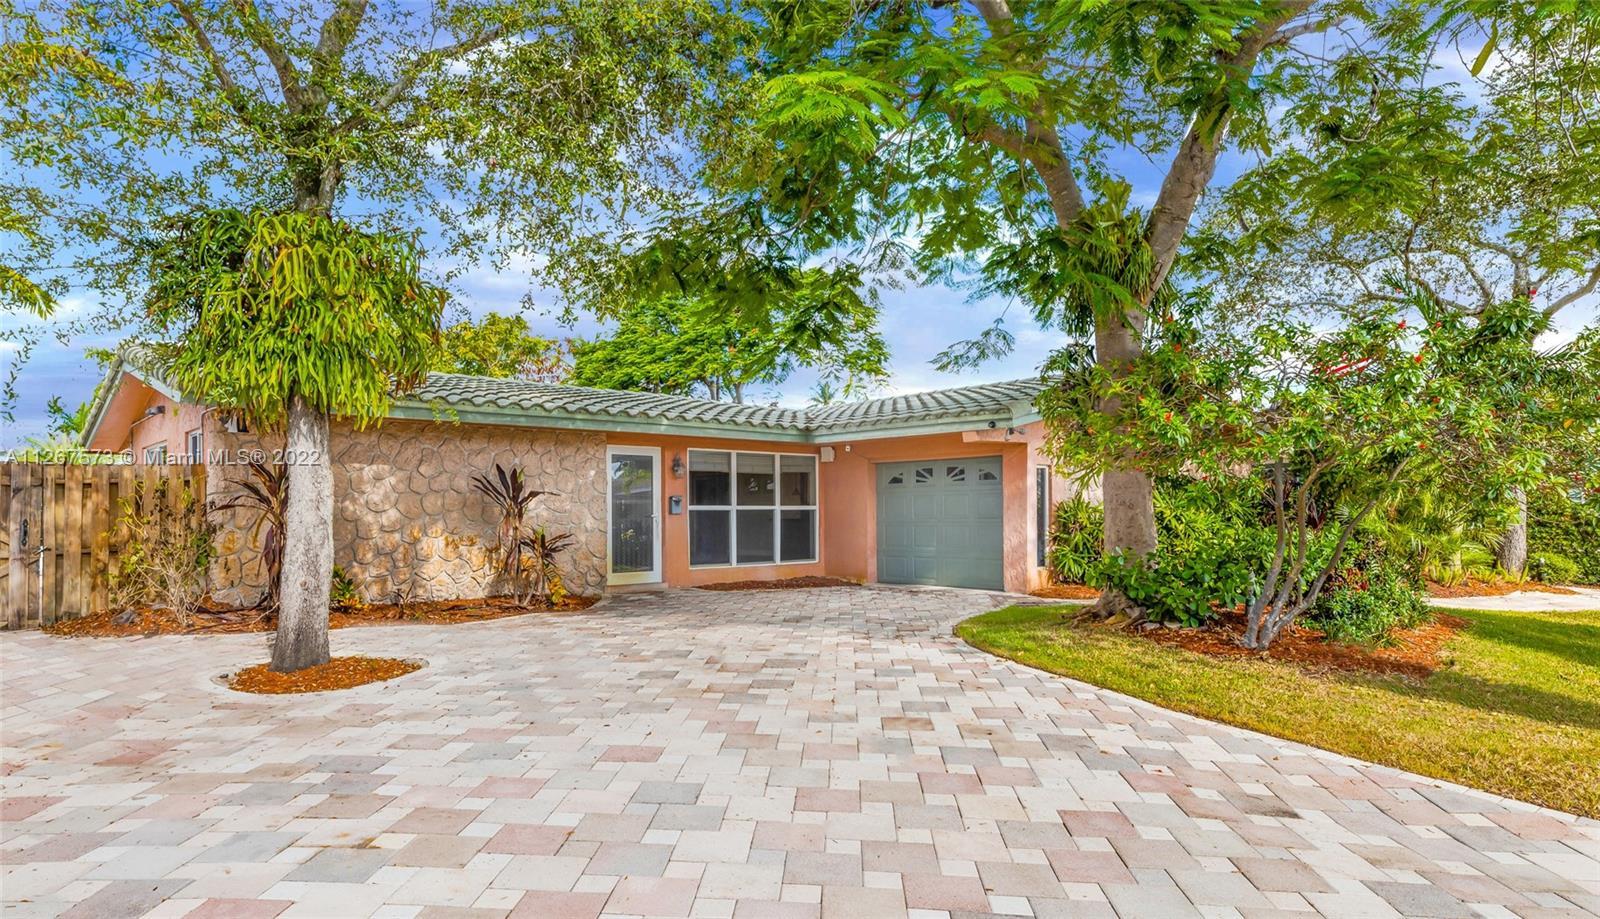 Gorgeous 3 Bedroom/2 Bathroom Waterfront Home Located in the Heart of Fort Lauderdale. With Over 70F